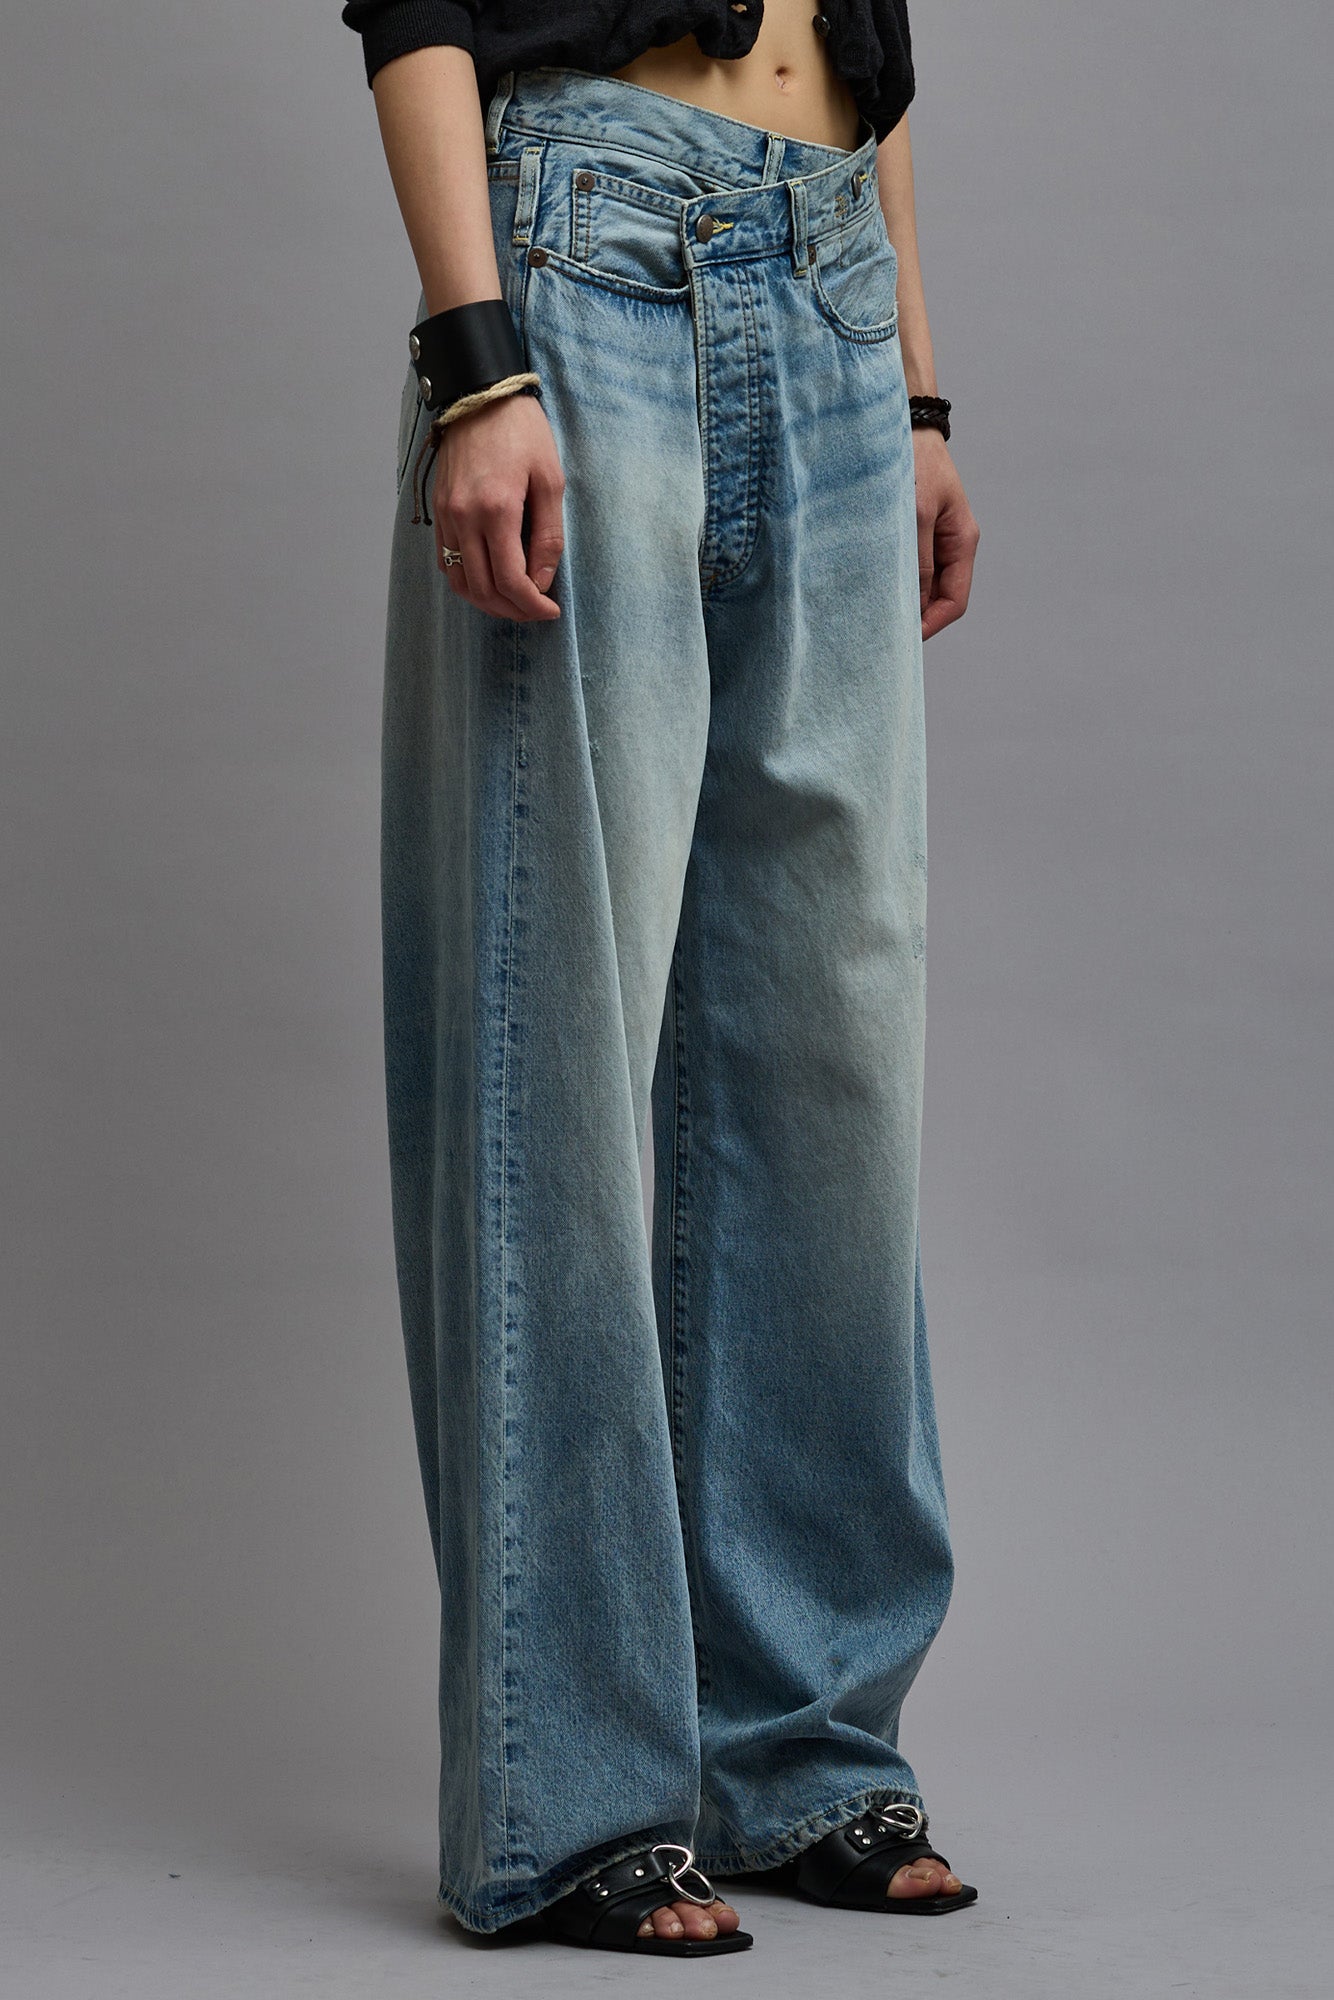 WIDE LEG CROSSOVER - HAVEN BLUE